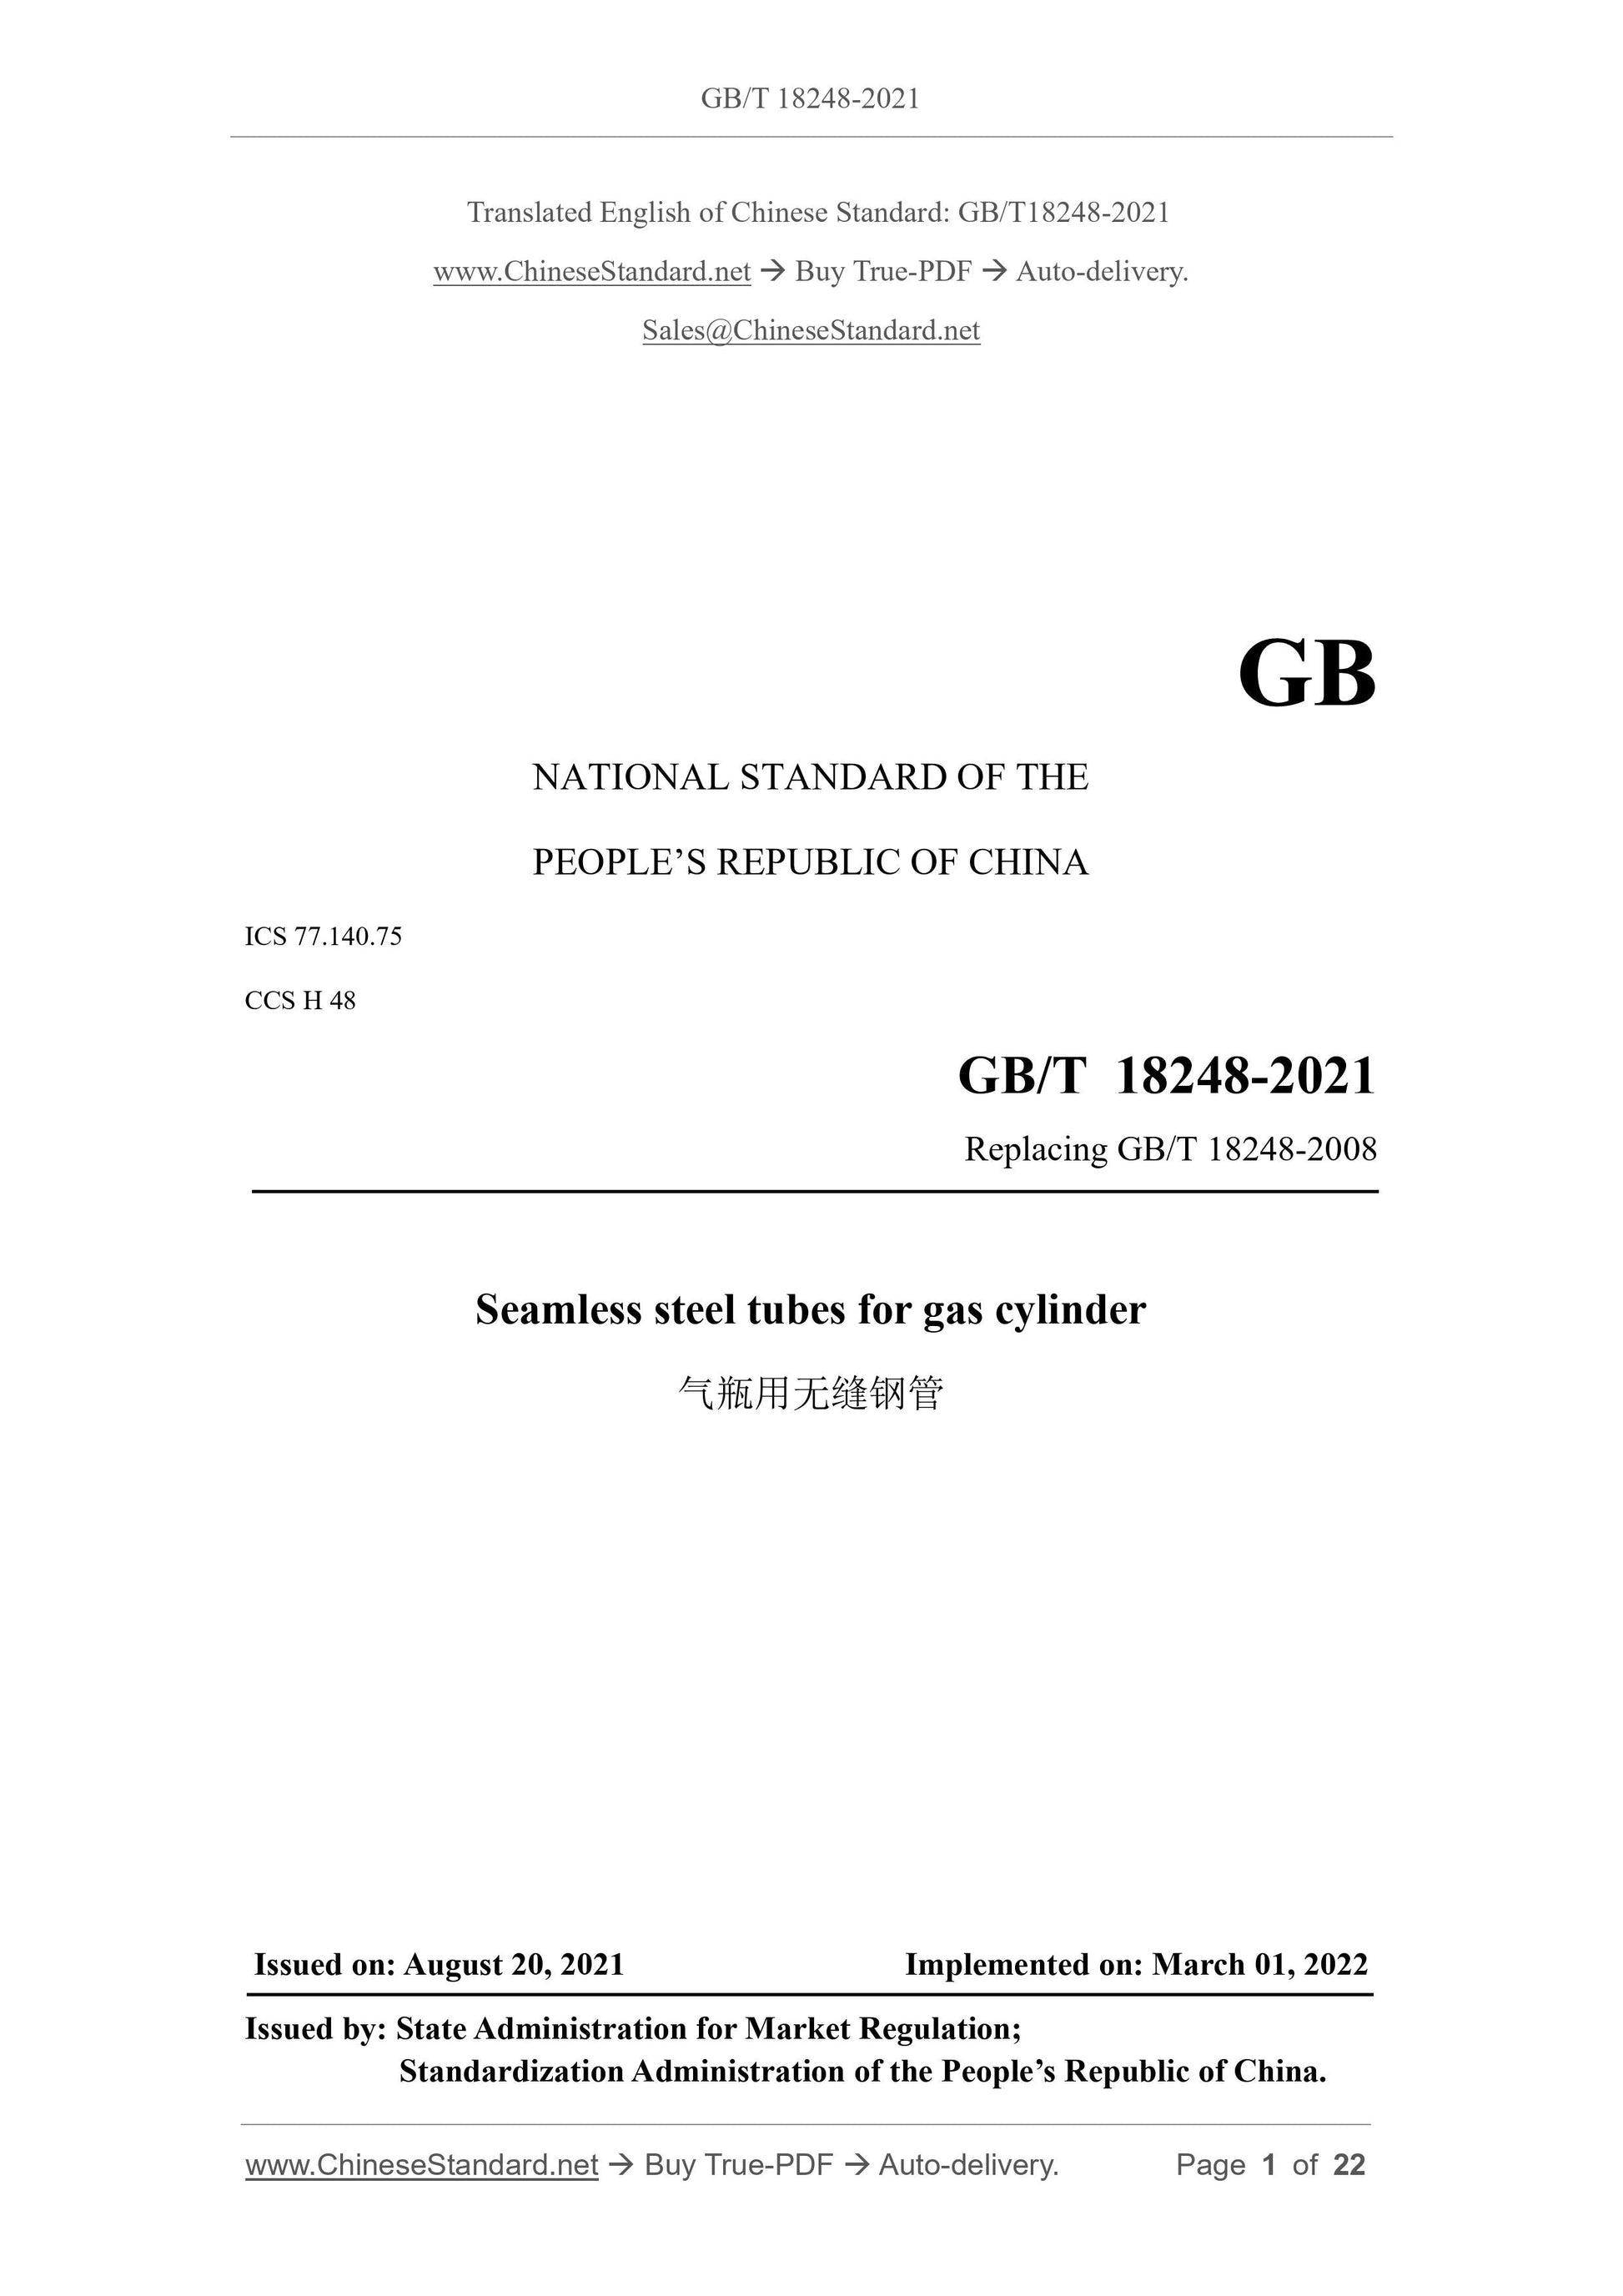 GB/T 18248-2021 Page 1